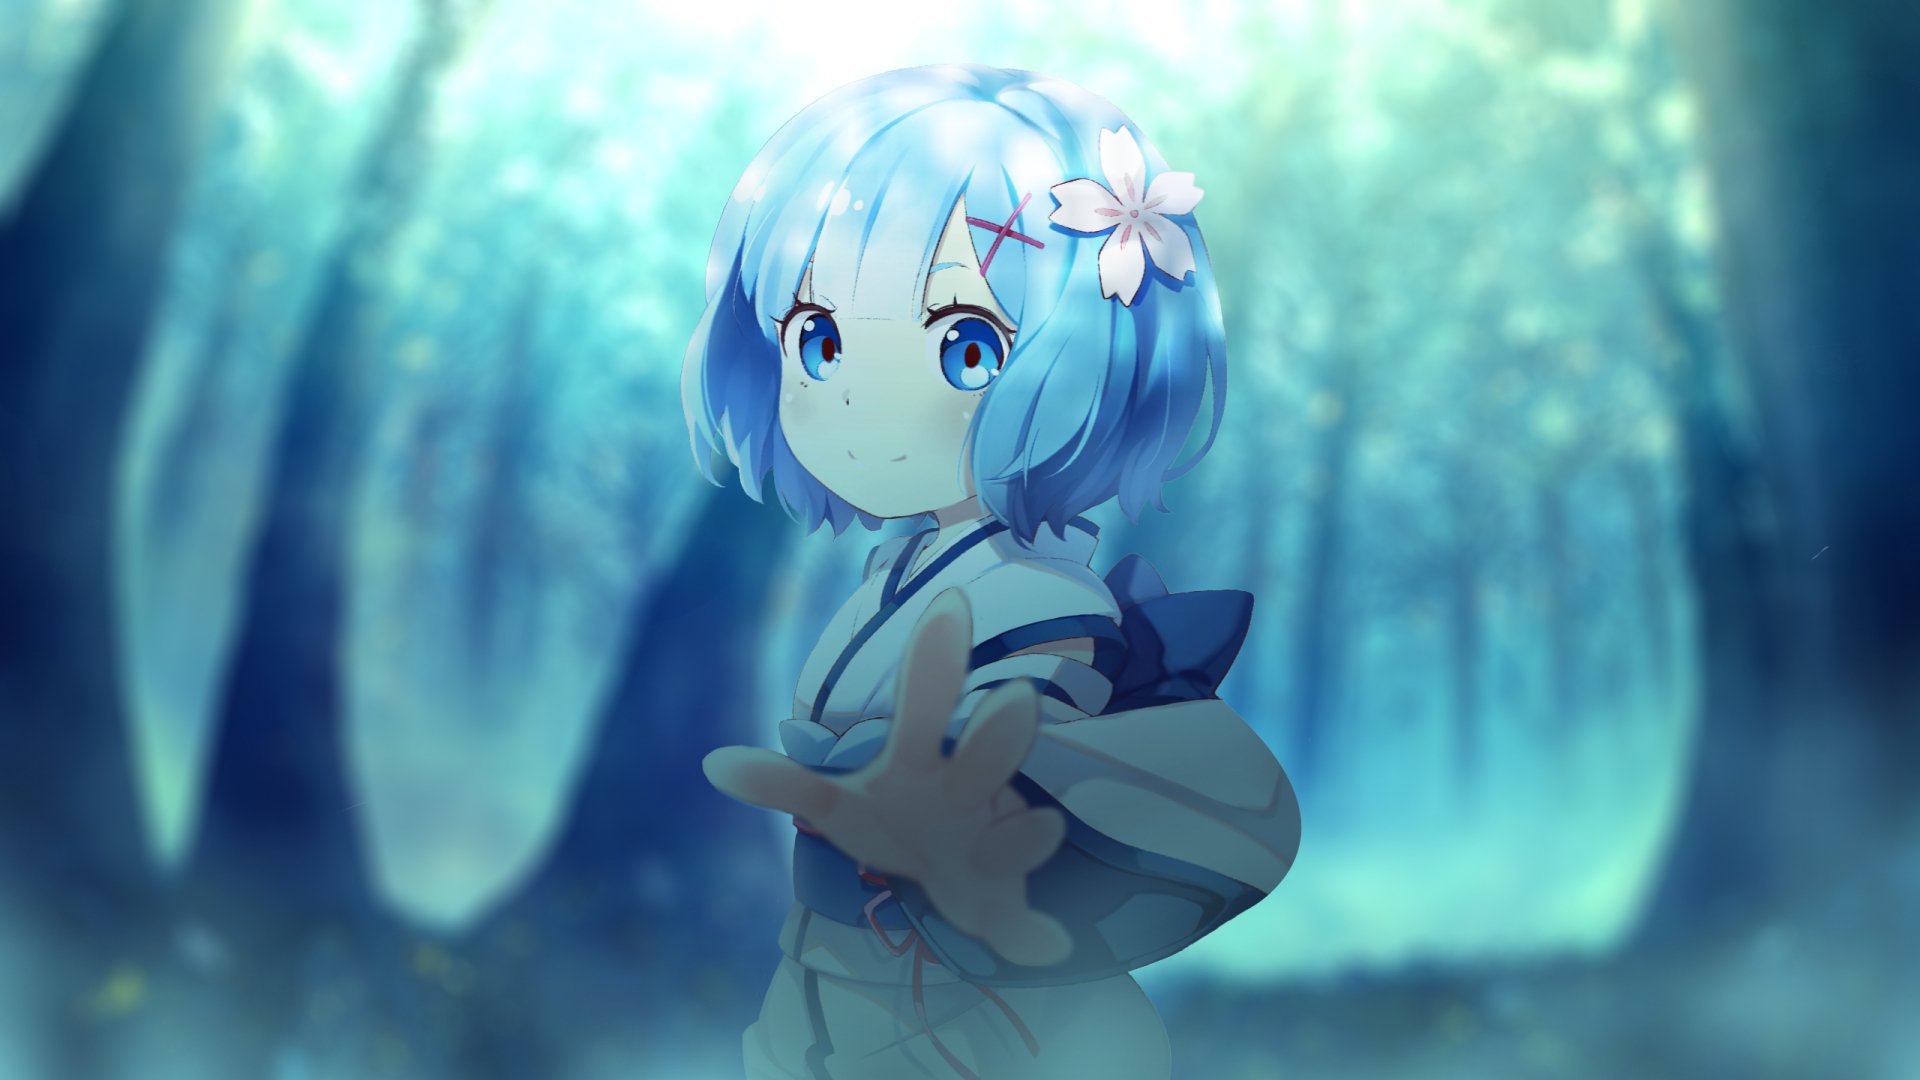 Rem being adorable aesthetic | Anime, Cute anime character, Anime girl-demhanvico.com.vn